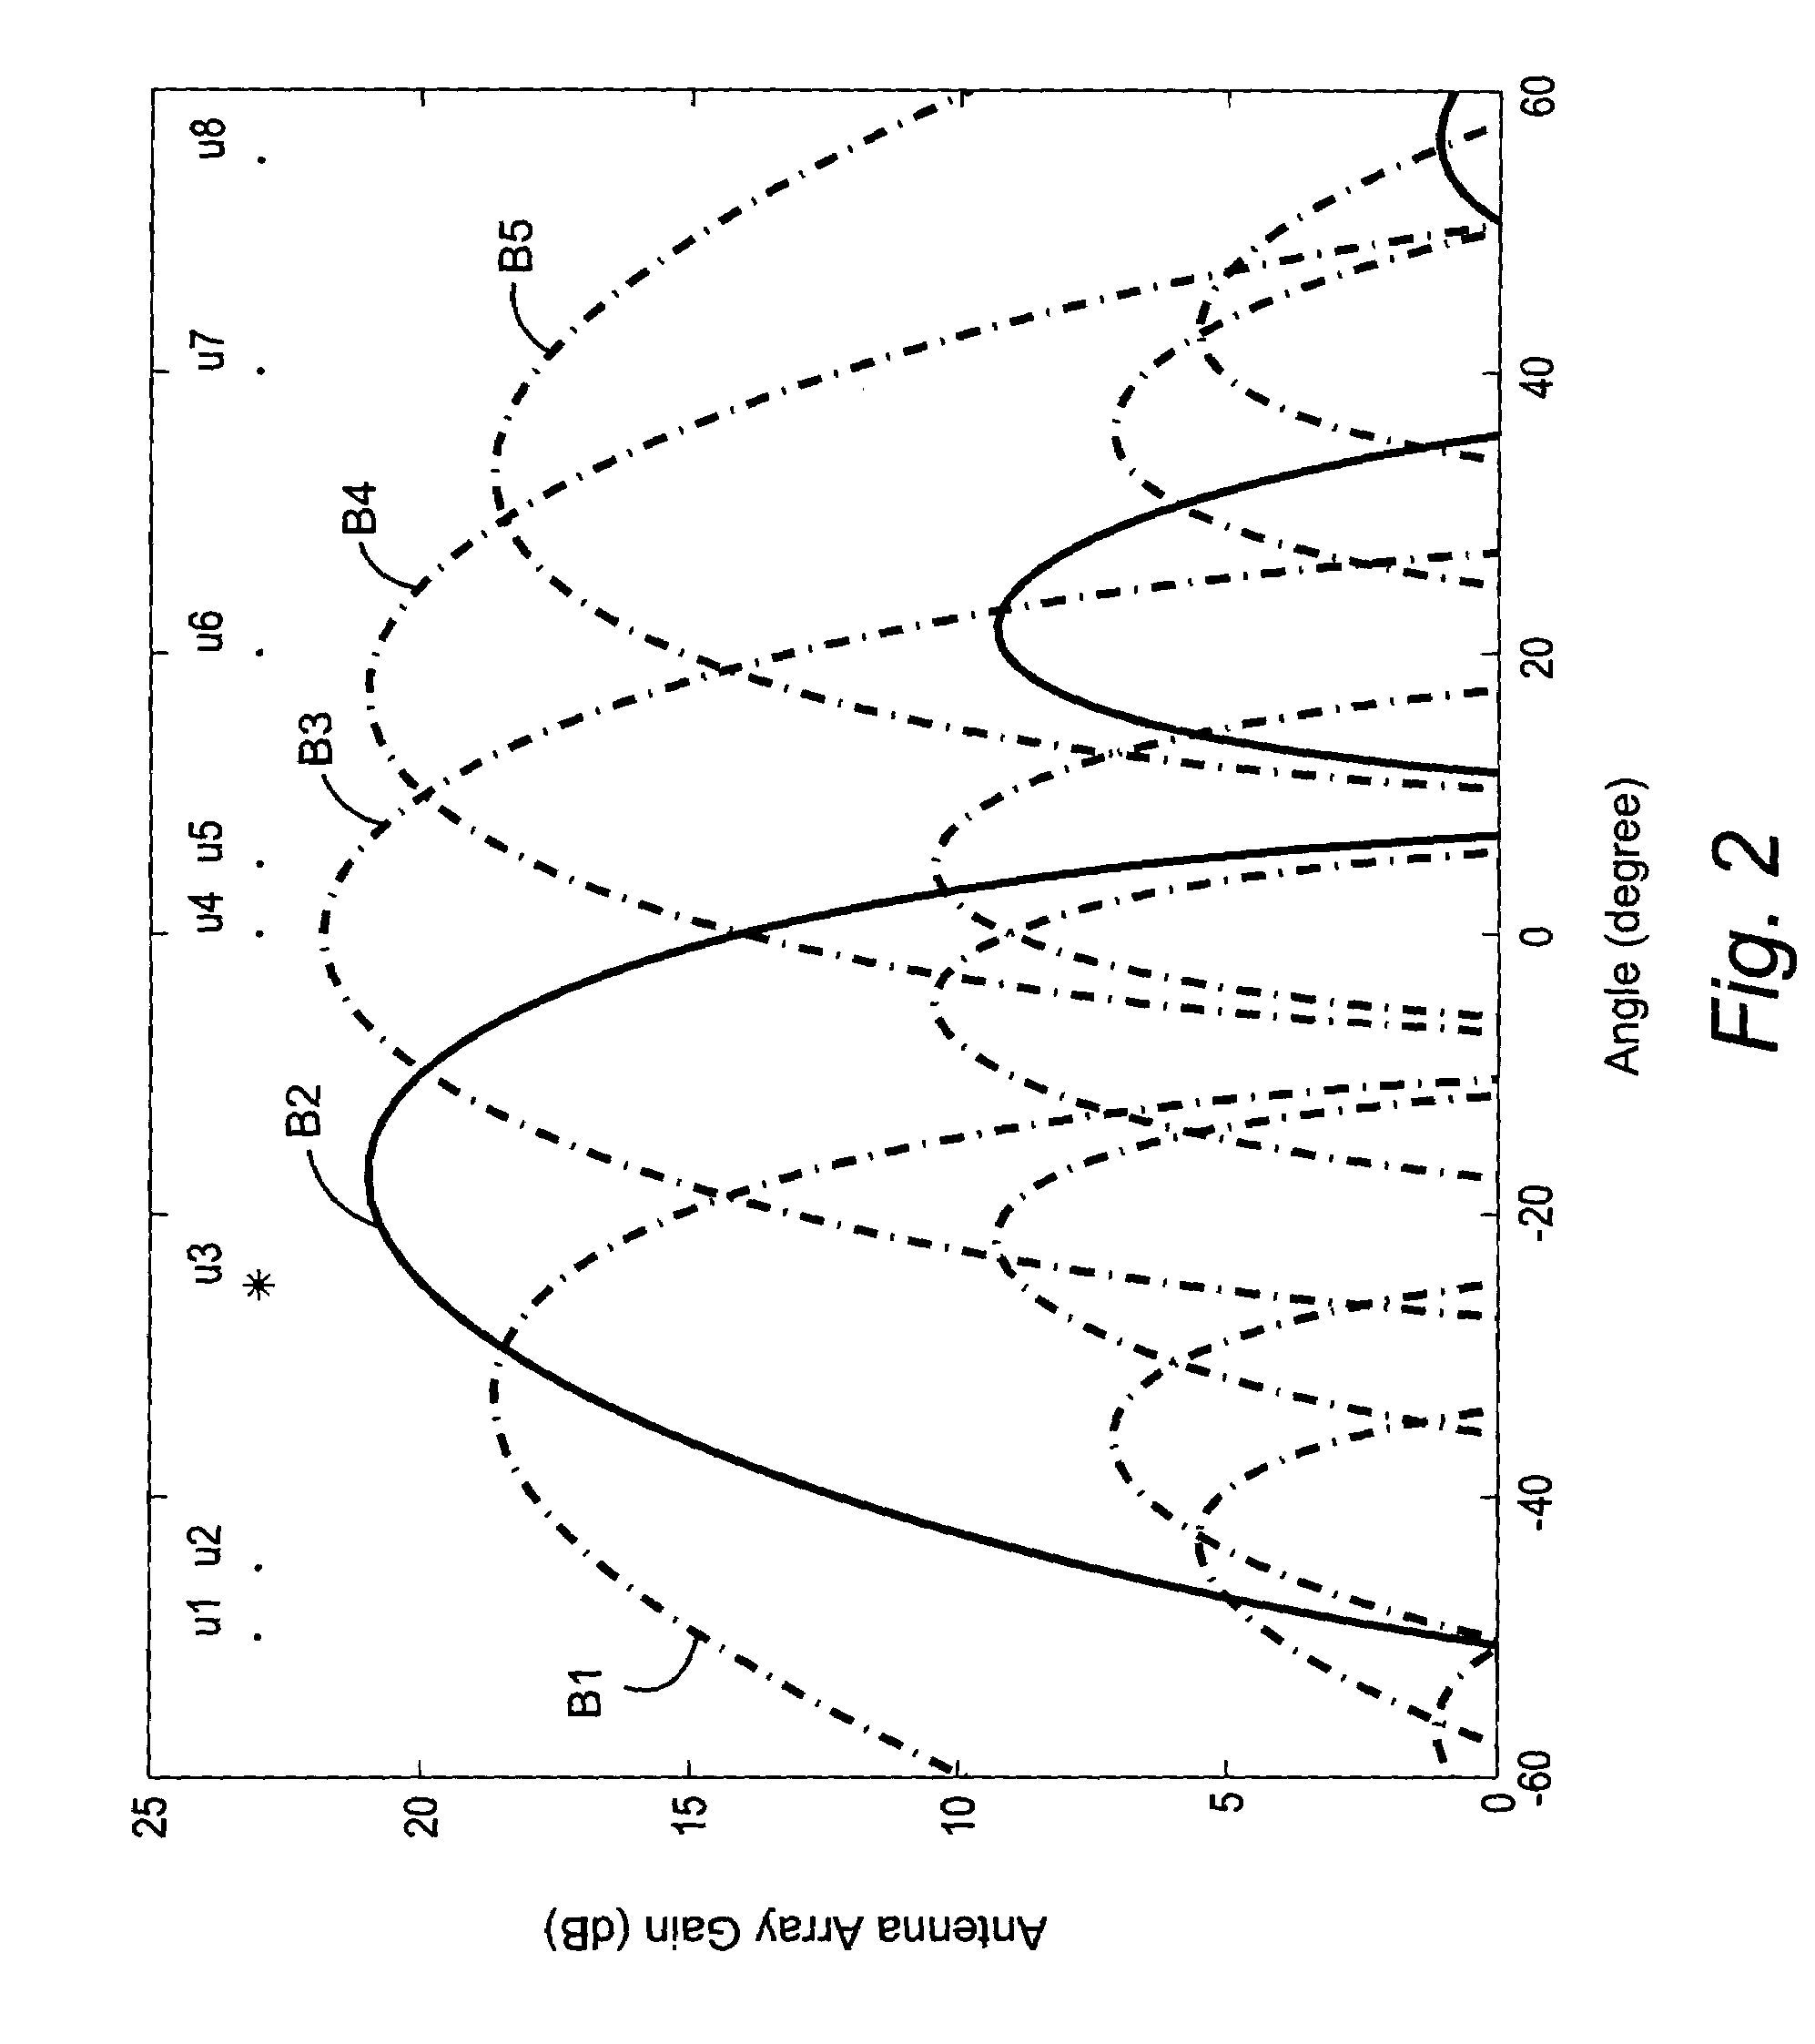 Reducing shared downlink radio channel interference by transmitting to multiple mobiles using multiple antenna beams